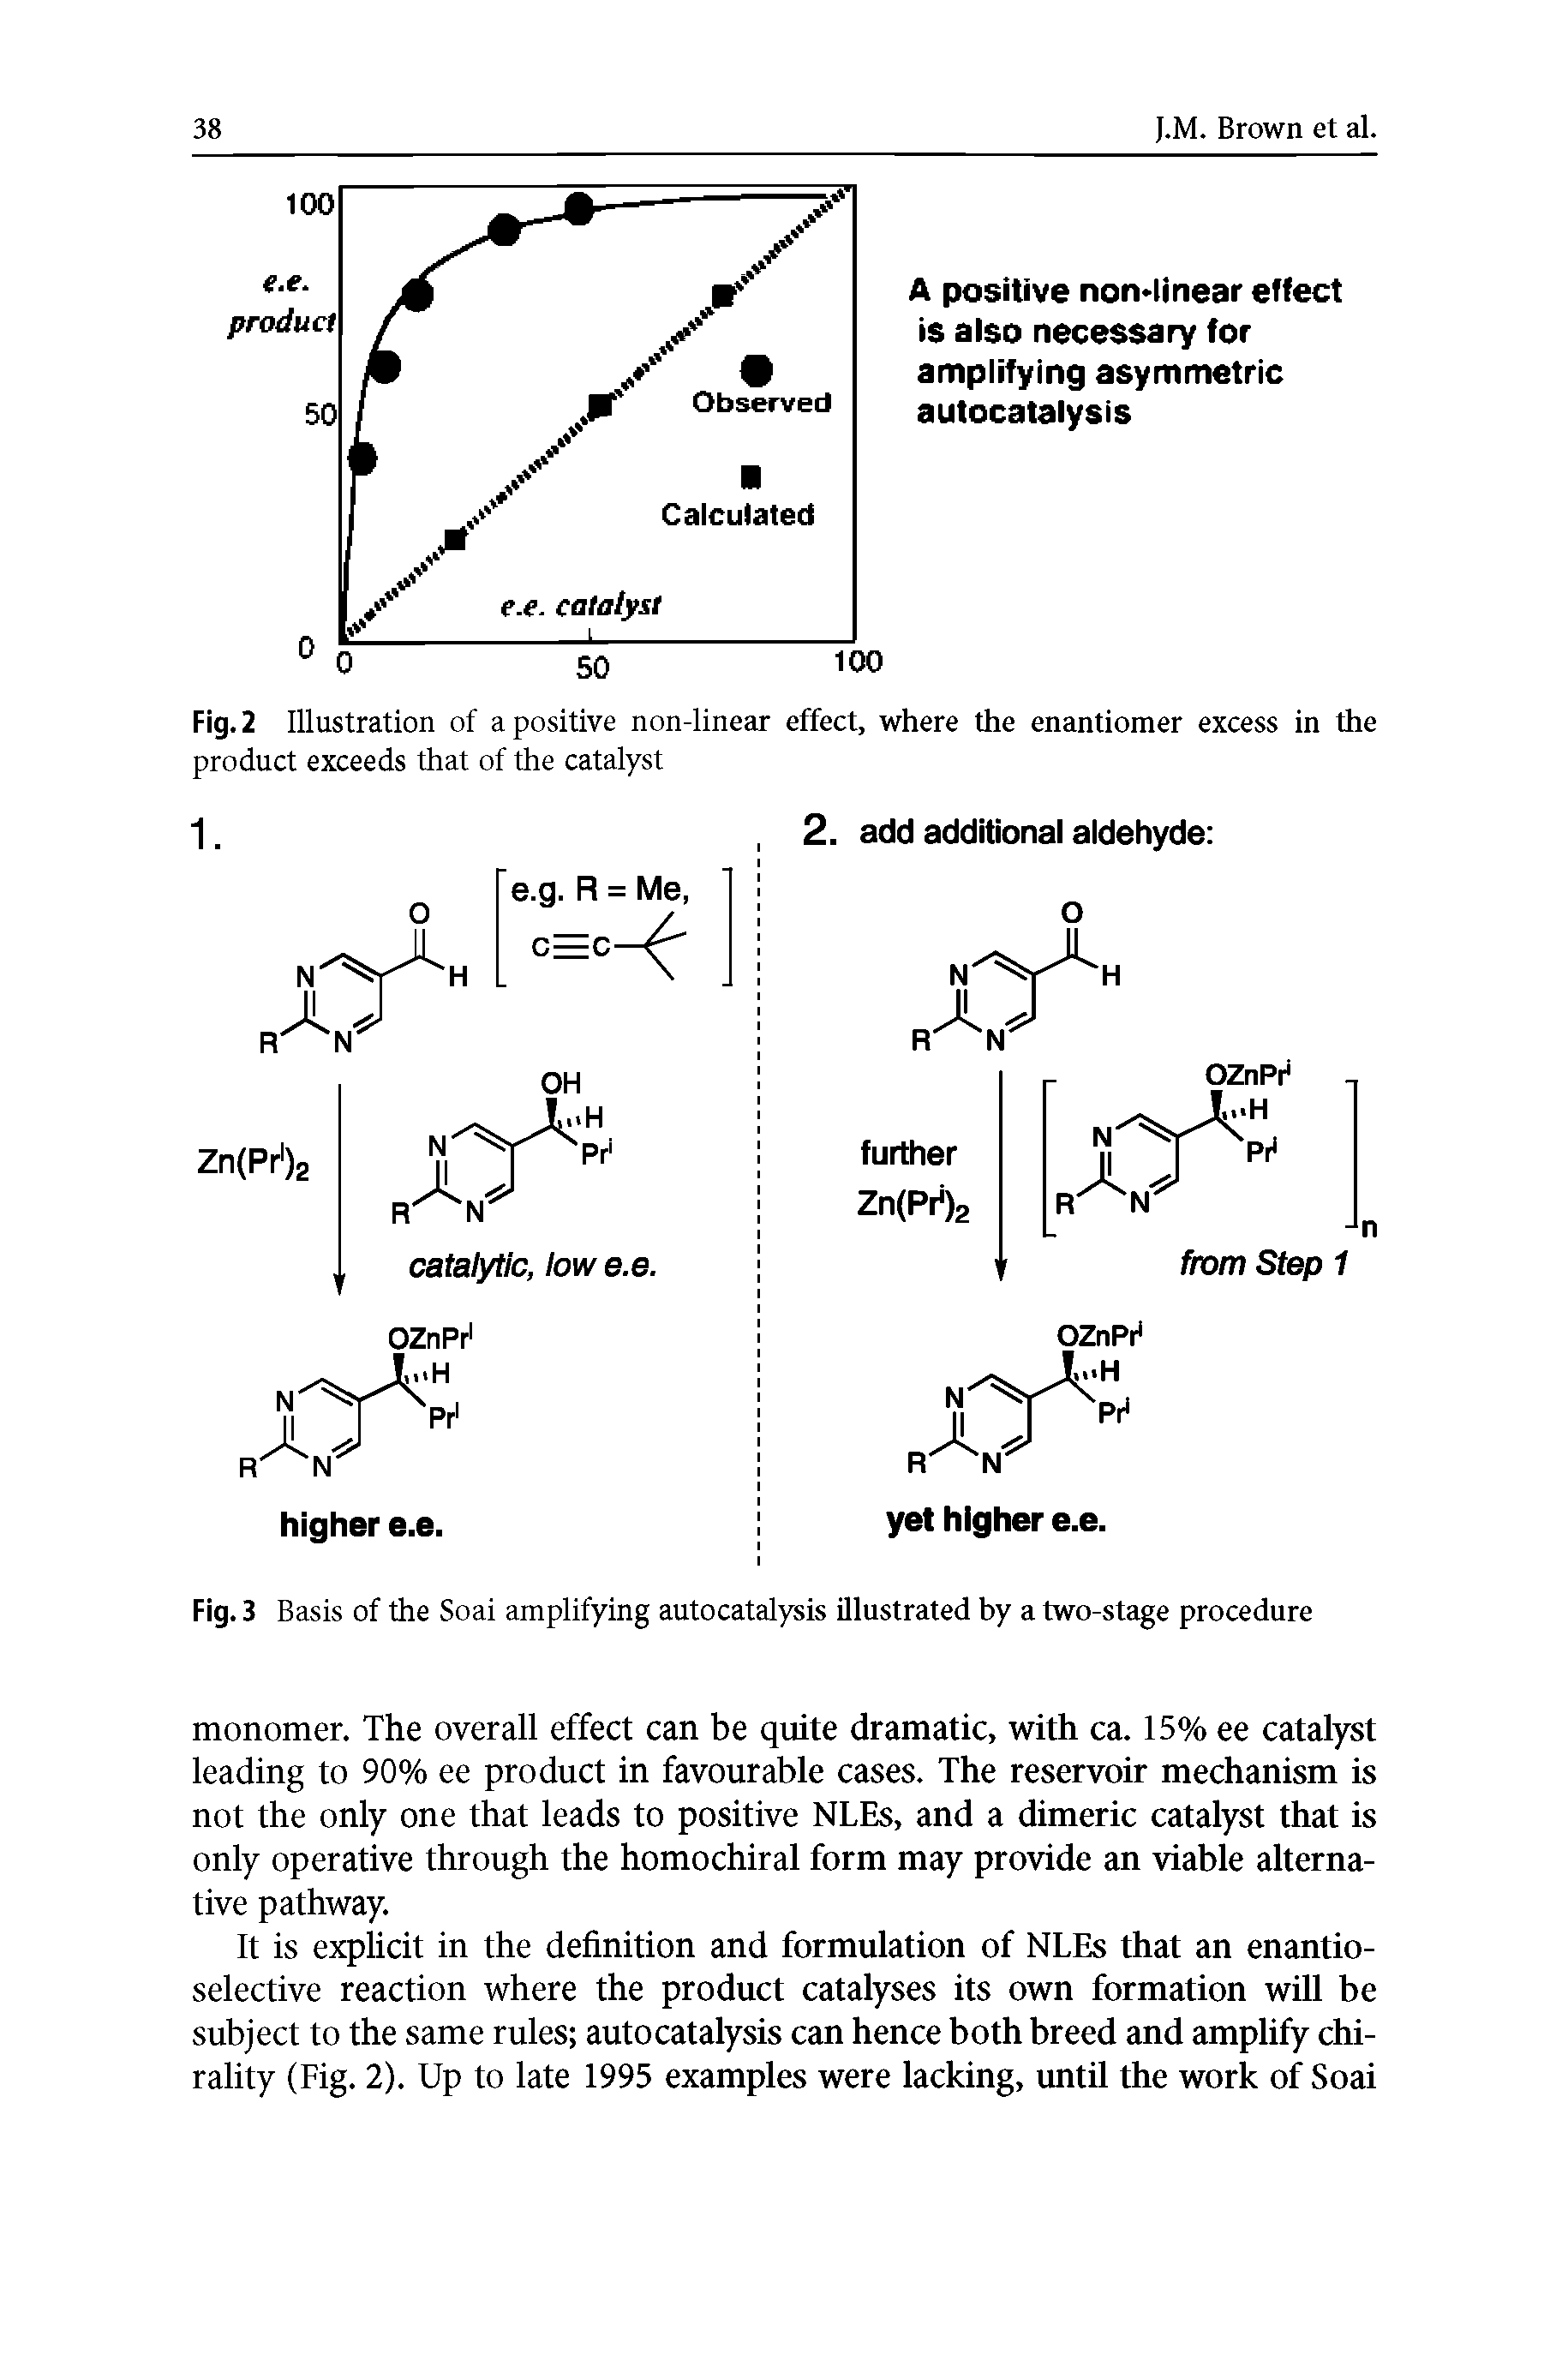 Fig. 2 Illustration of a positive non-linear effect, where the enantiomer excess in the product exceeds that of the catalyst...